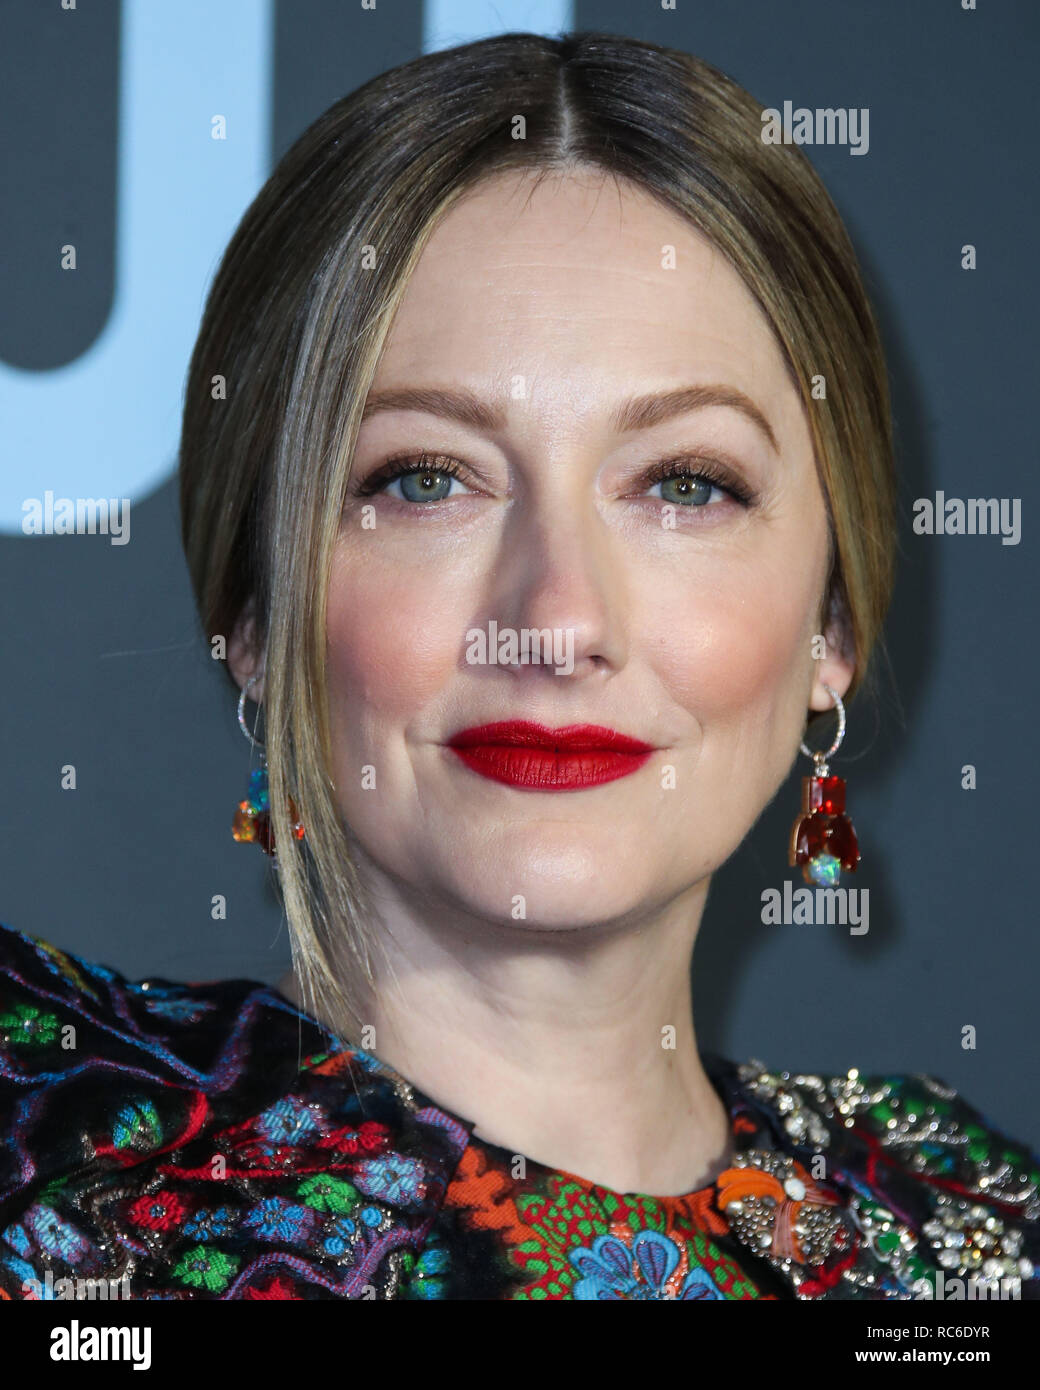 Santa Monica, United States. 13th Jan, 2019. Actress Judy Greer wearing  Reem Acra with Olgana Paris shoes, Irene Neuwirth jewelry, and an Edie  Parker clutch arrives at the 24th Annual Critics' Choice